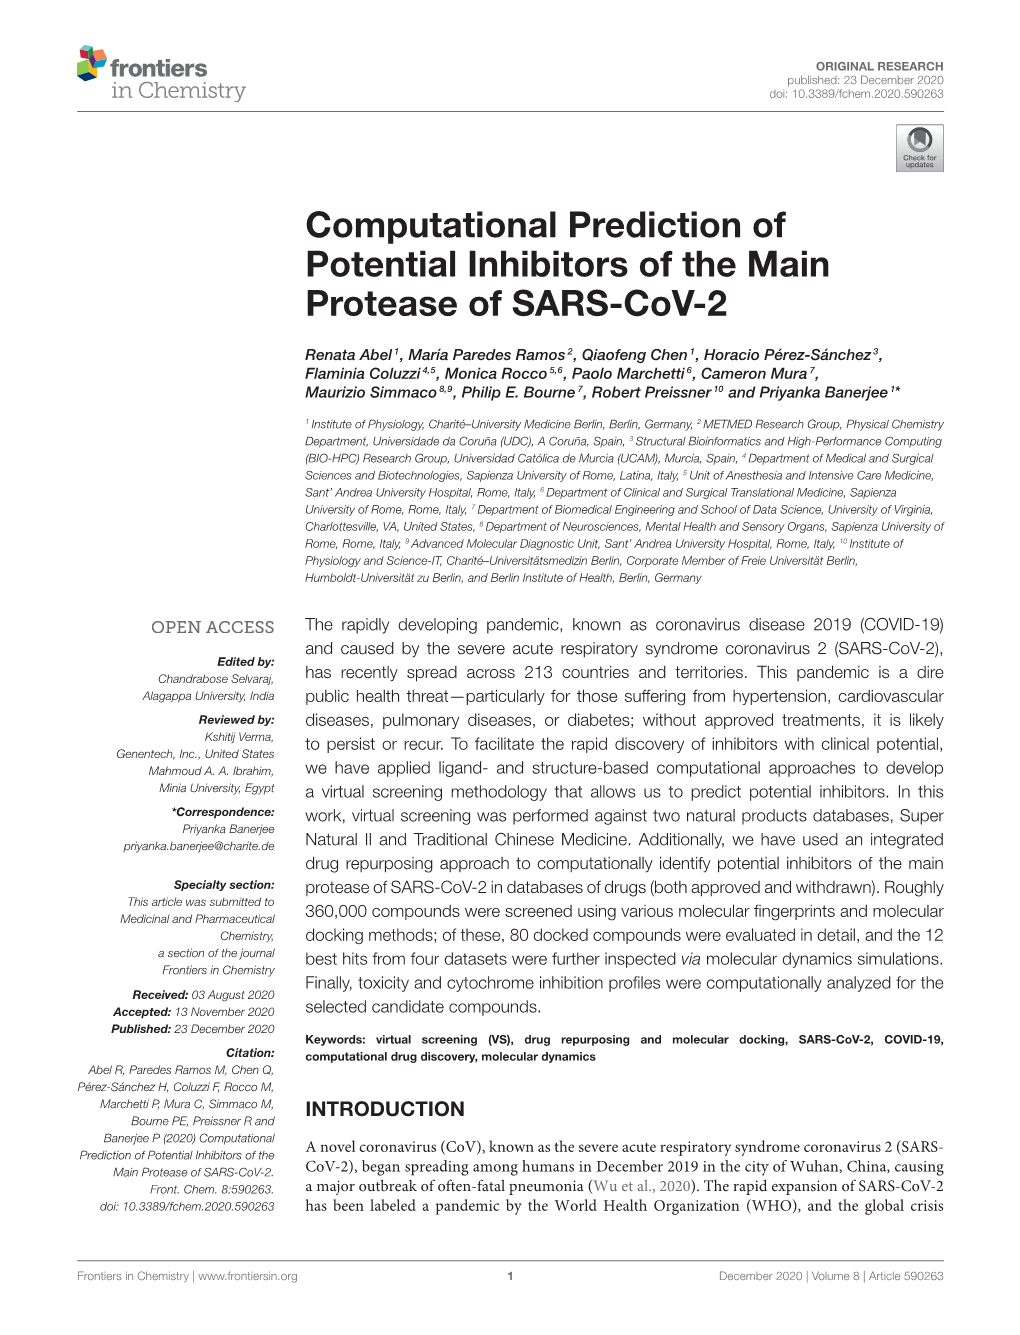 Computational Prediction of Potential Inhibitors of the Main Protease of SARS-Cov-2